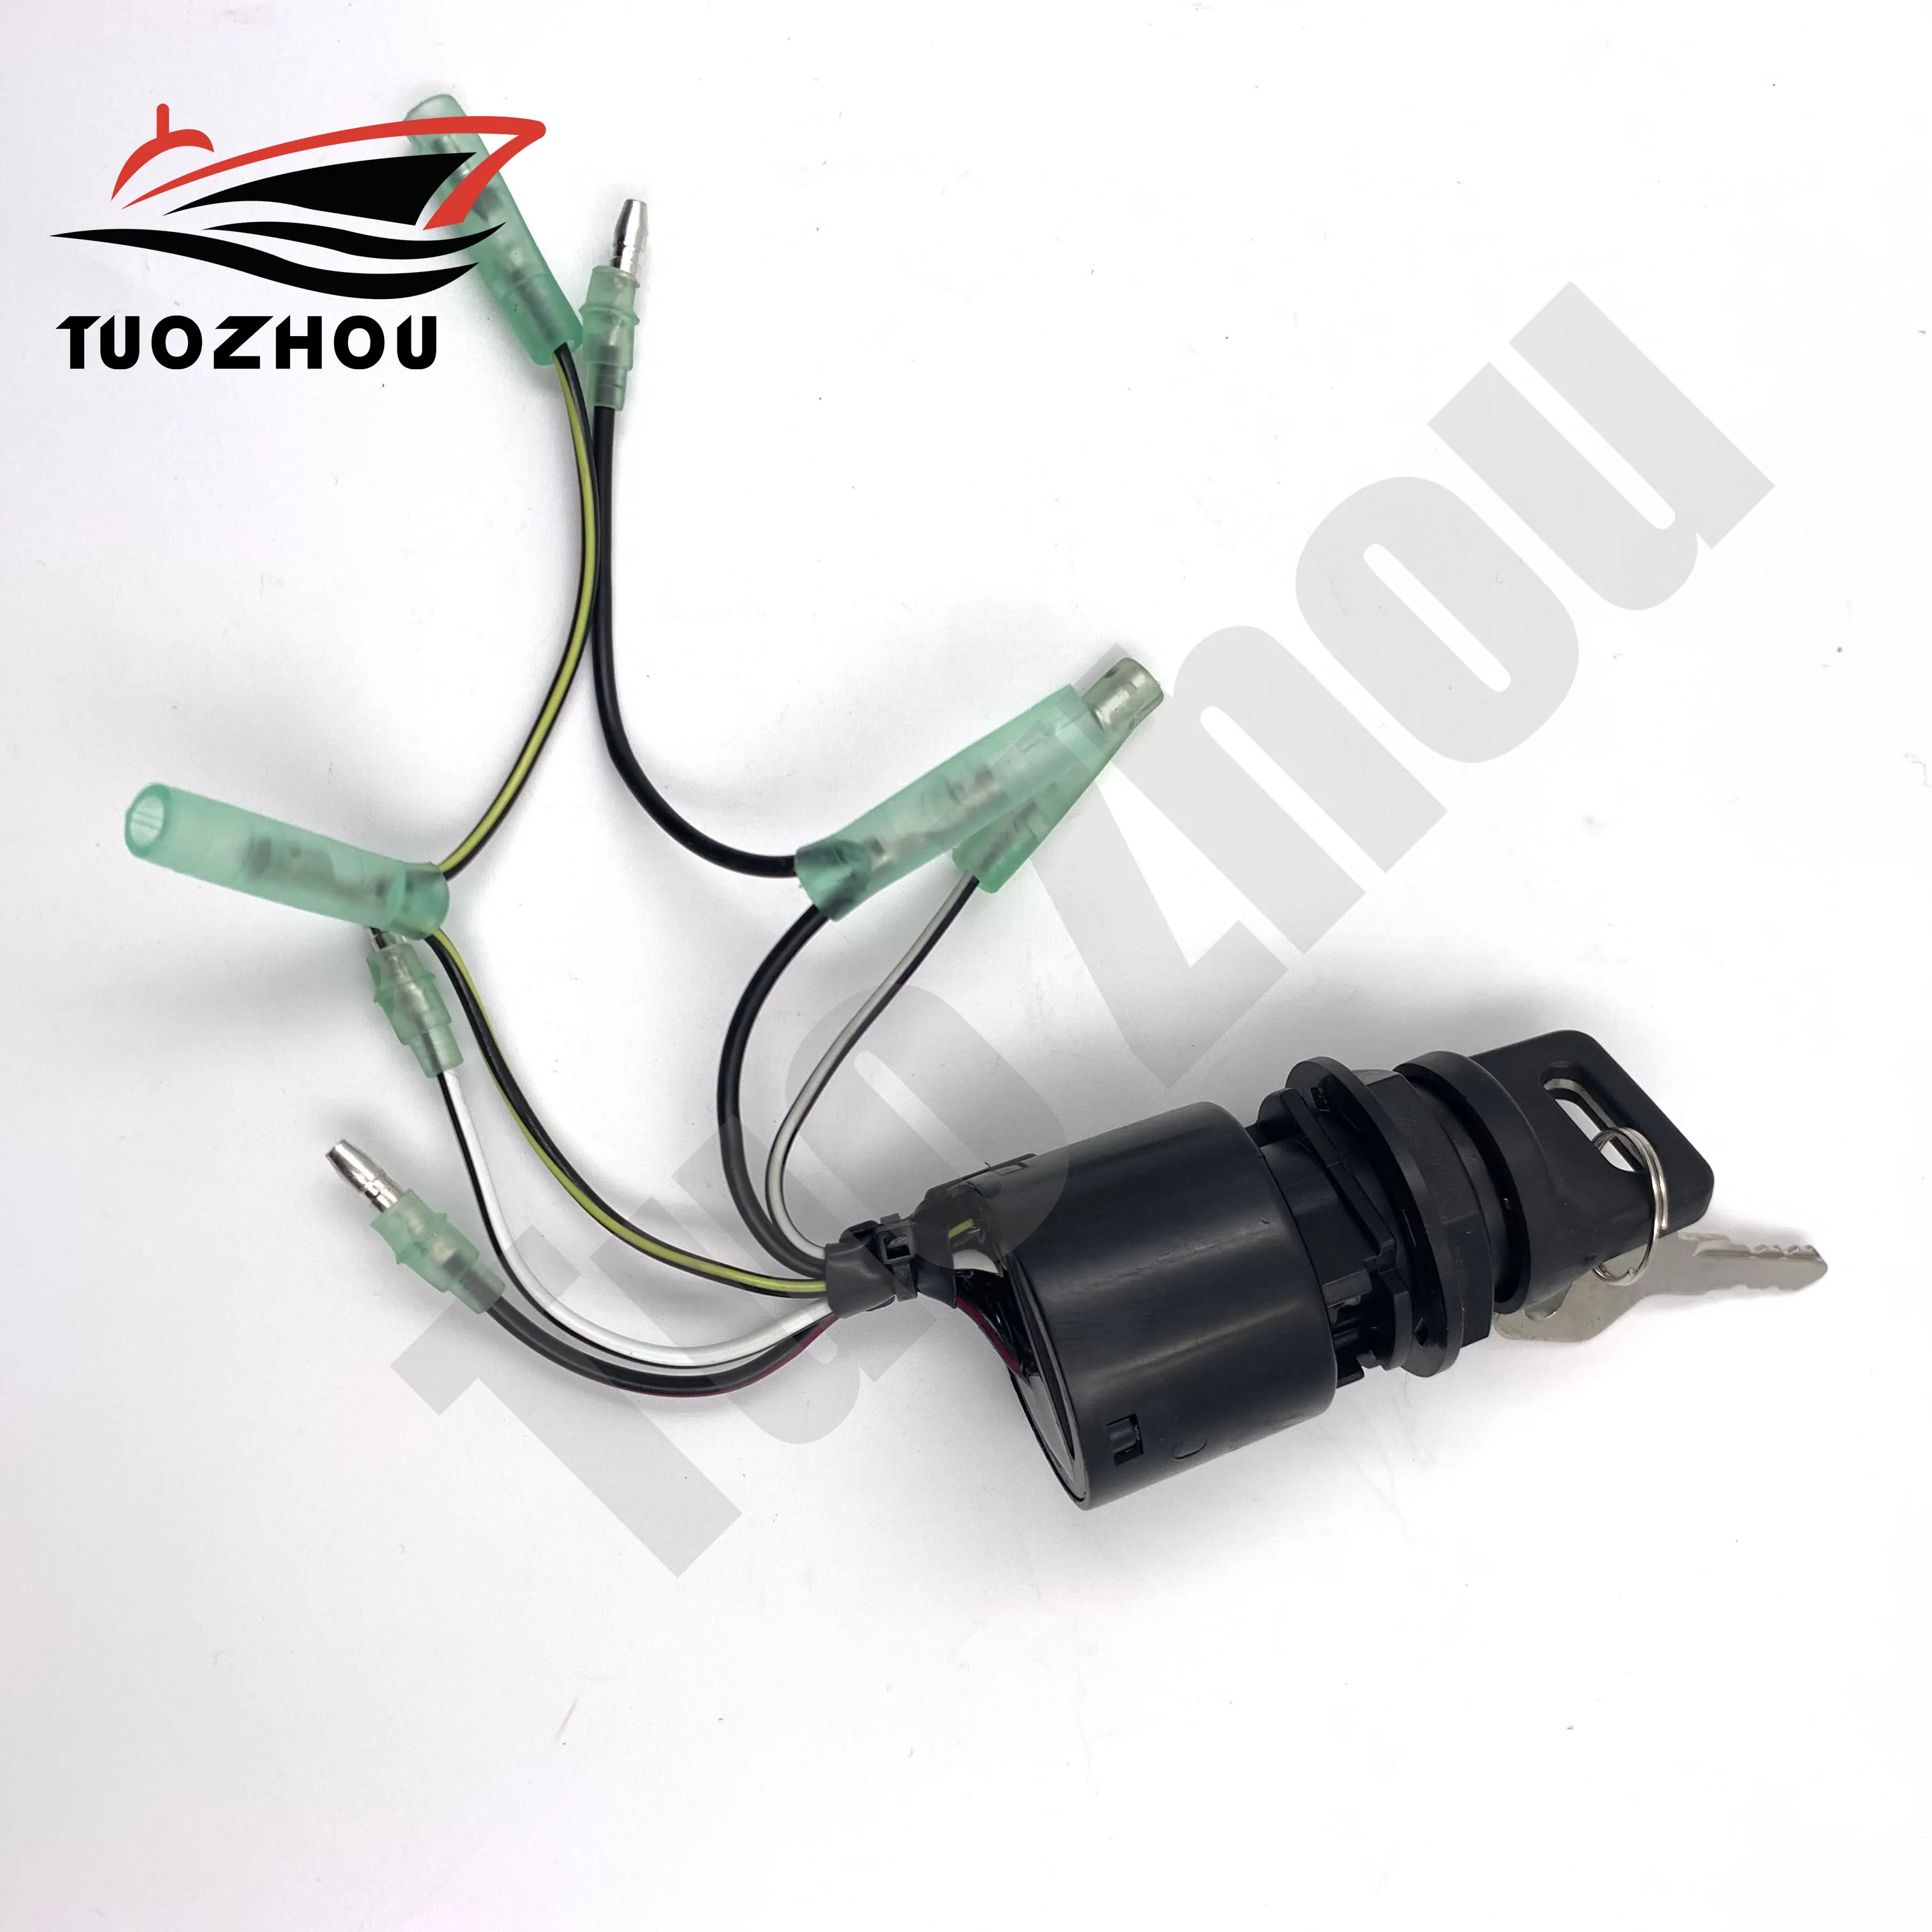 Remote Control Box Ignition Switch / Main Switch Assy 35100-ZV5-013 for Honda Outboard Engine Boat Motor